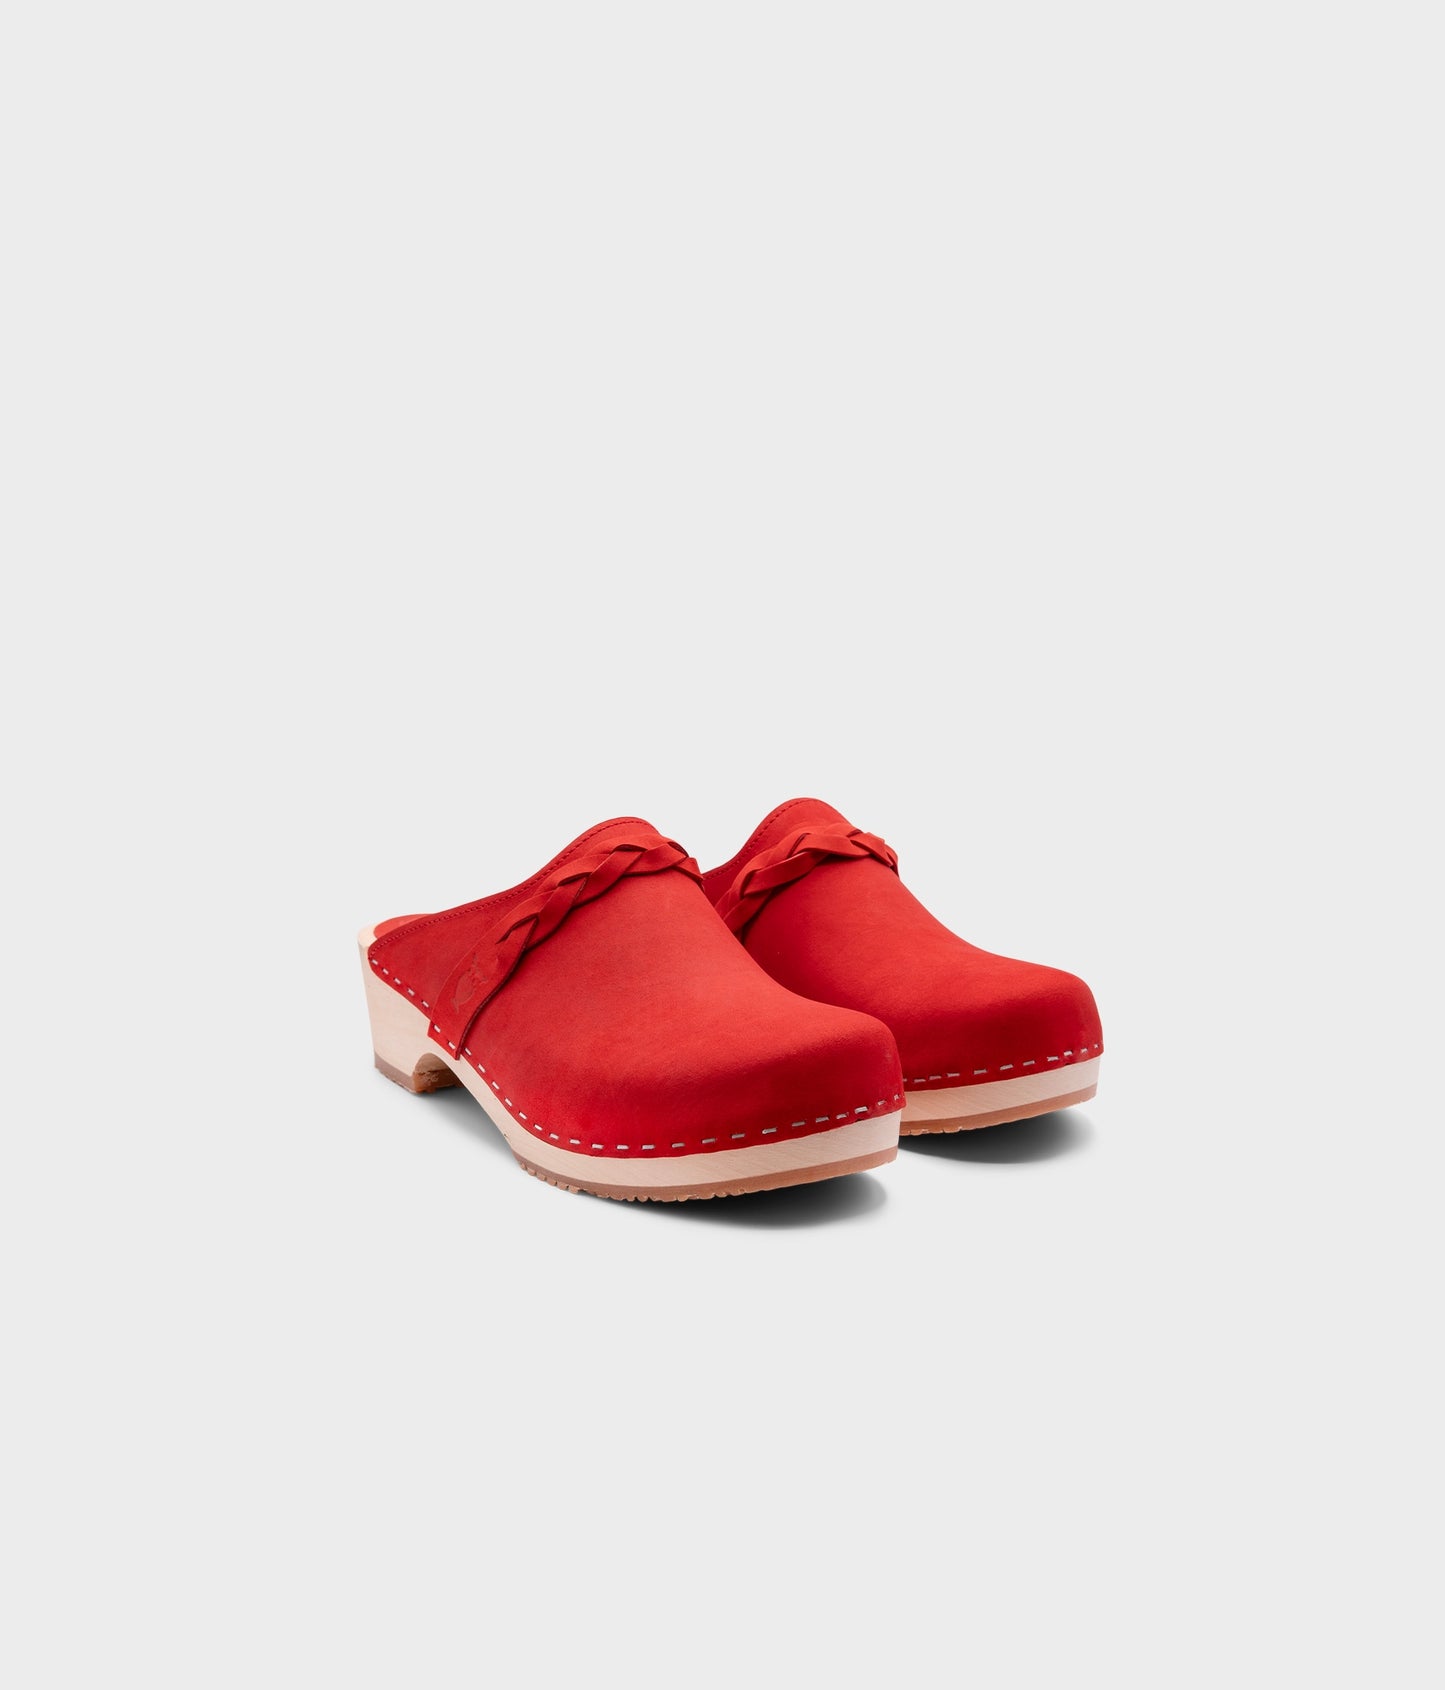 low heeled clog mules in red nubuck leather with a braided strap stapled on a light wooden base